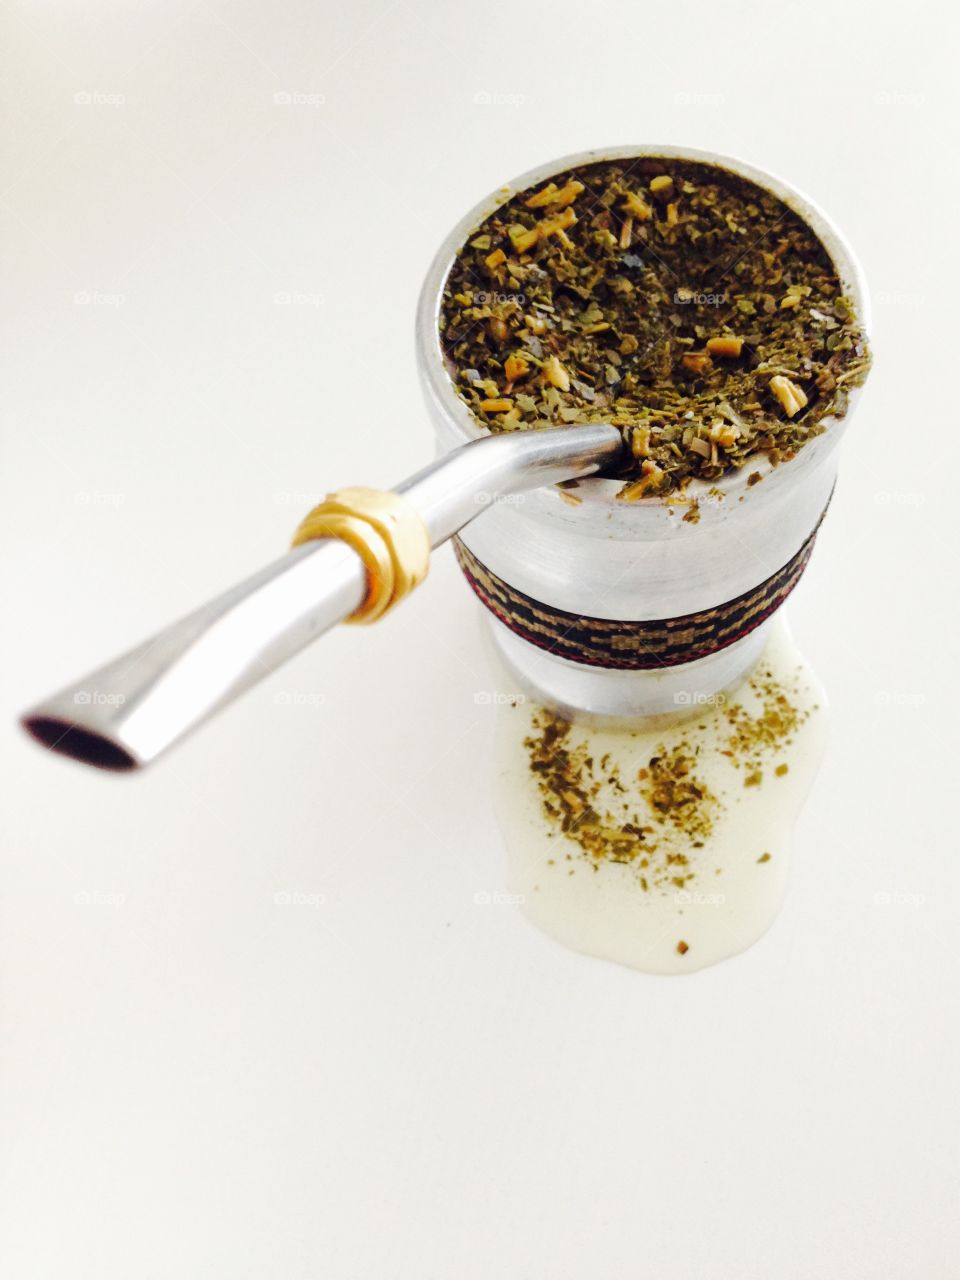 The drink of Yerba Mate. The traditional Argentinian energizing drink of Yerba Mate.